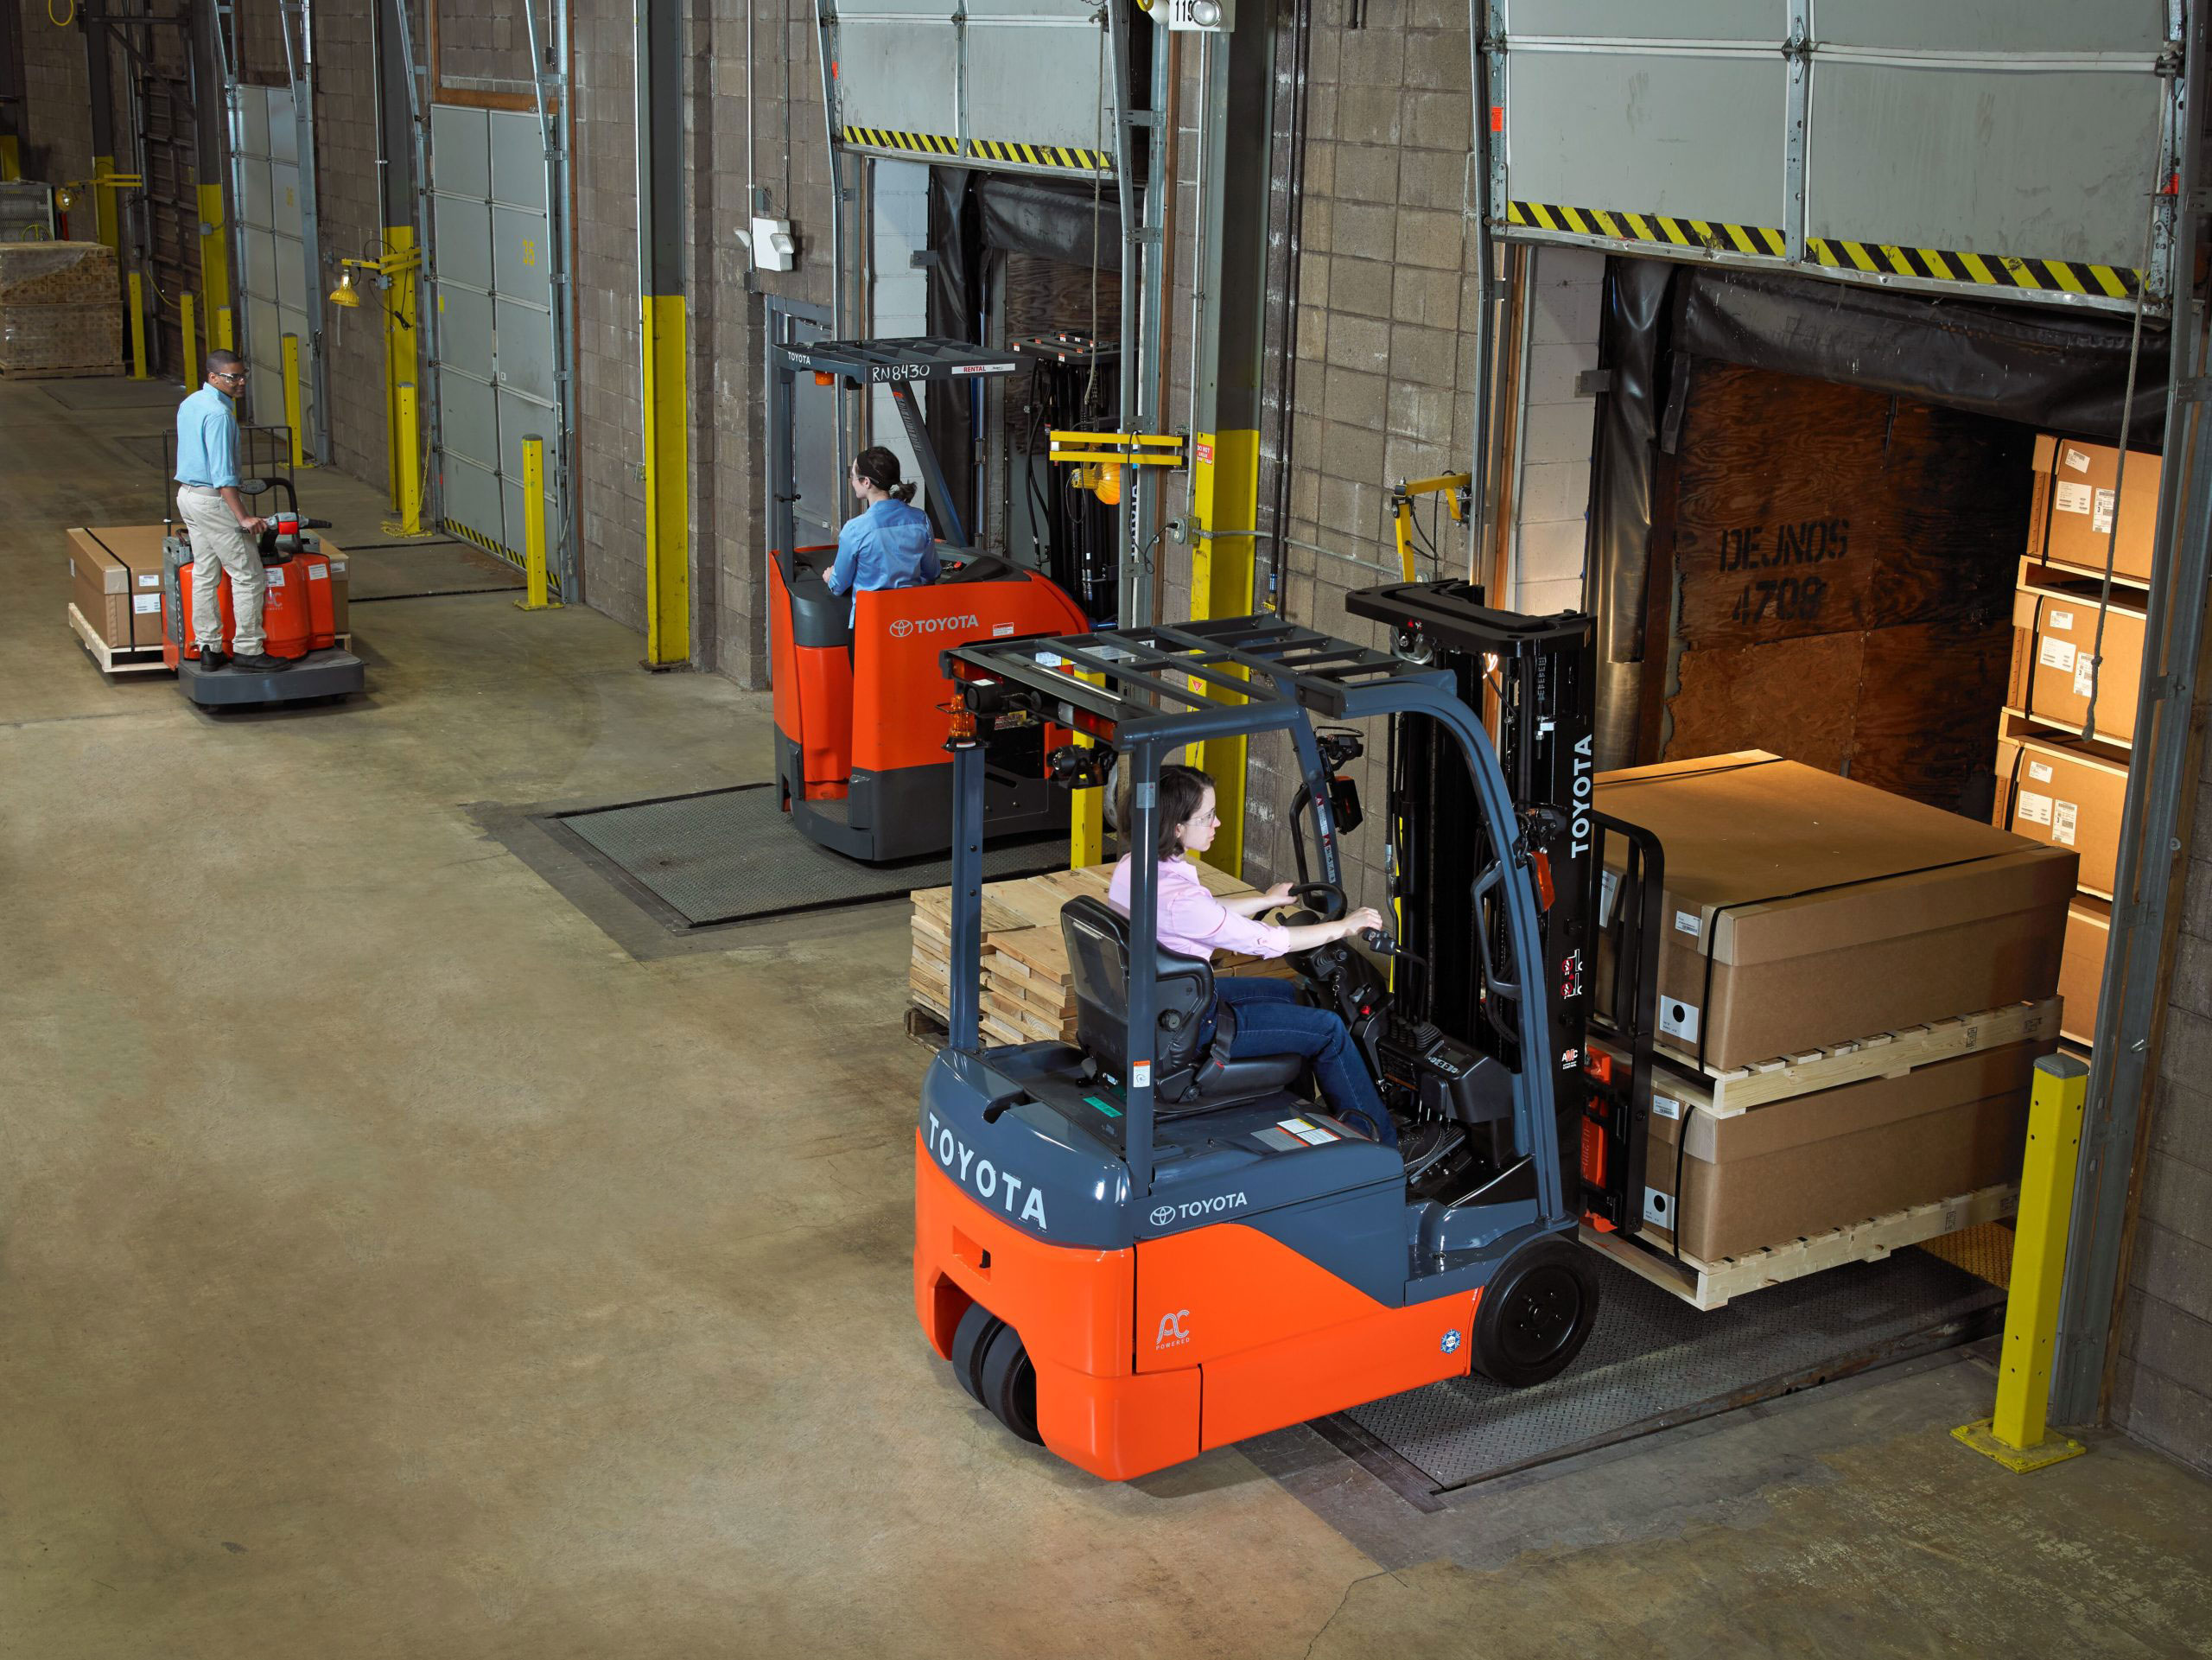 12 Reasons to Convert to Electric Forklifts